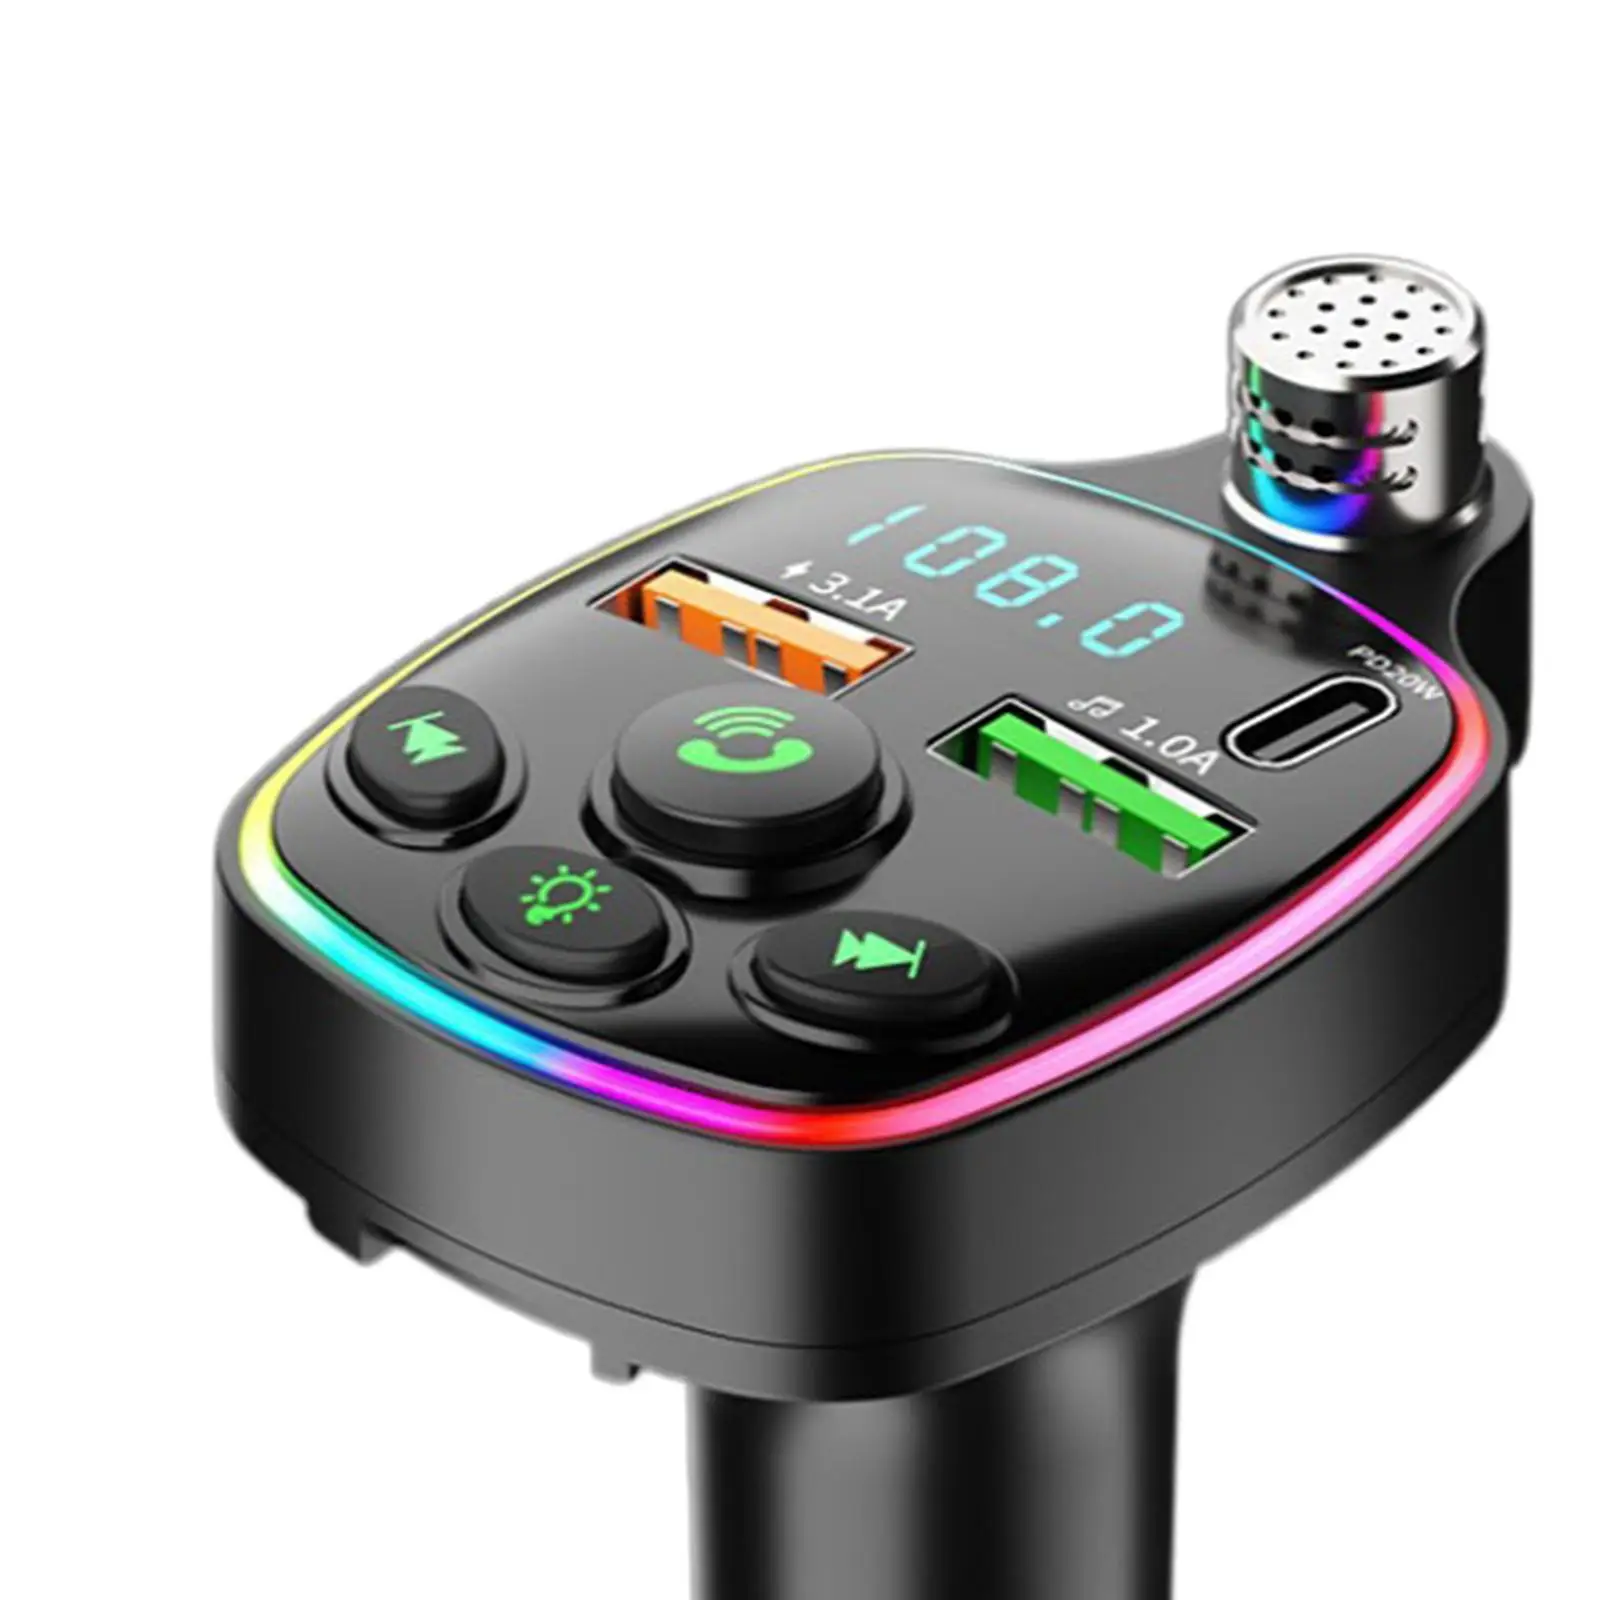 Car Adapter Support U Disk Handsfree Calling Color LED Backlit Lossless Music Wireless FM Radio Transmitter MP3 Music Player